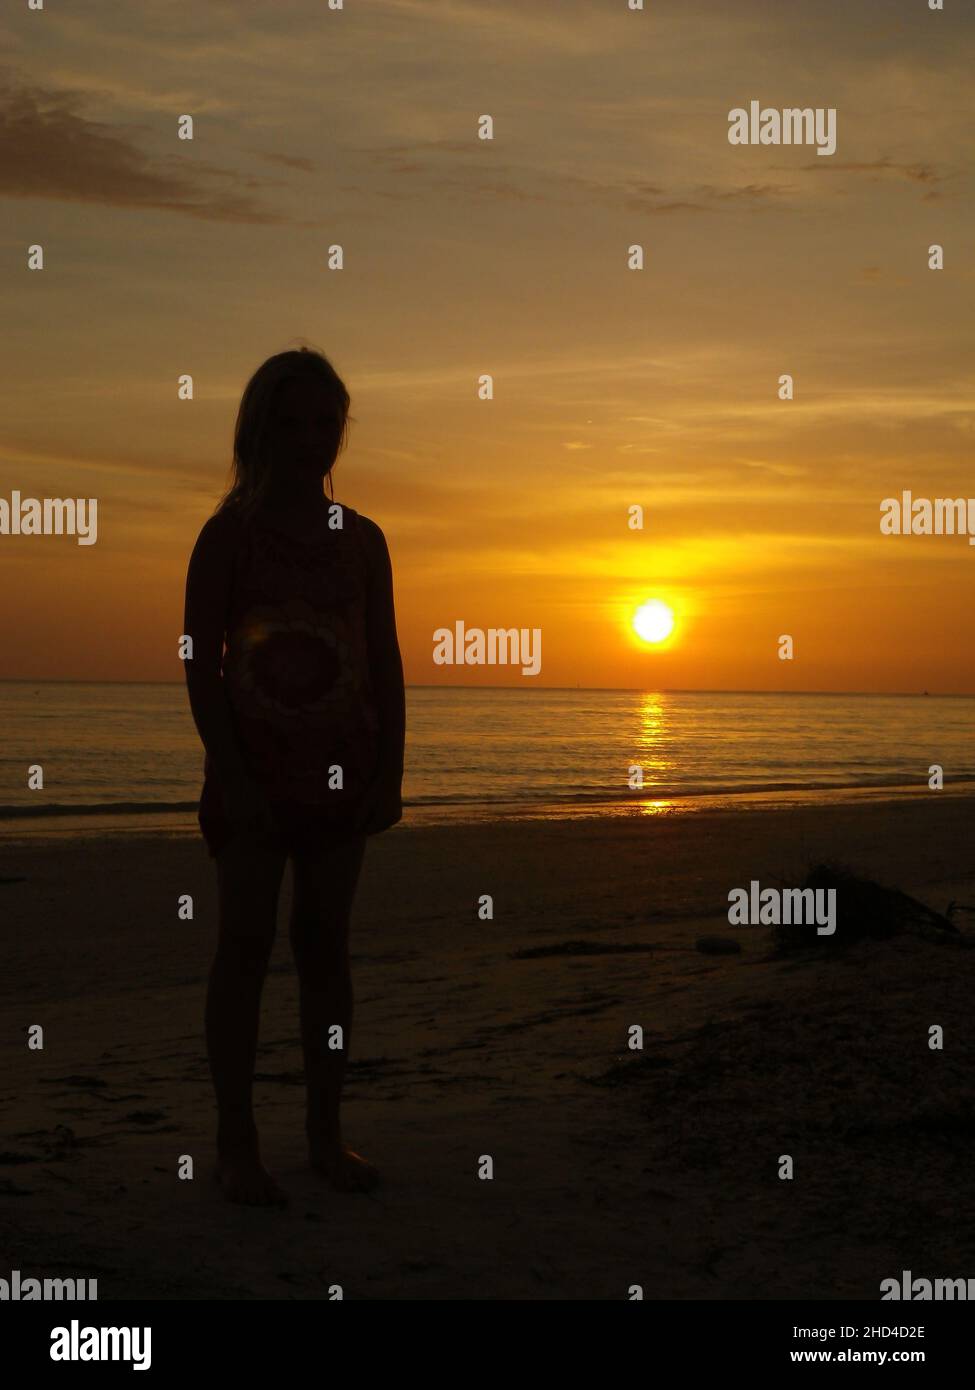 People's silhouette at sunset over Lido Beach Stock Photo